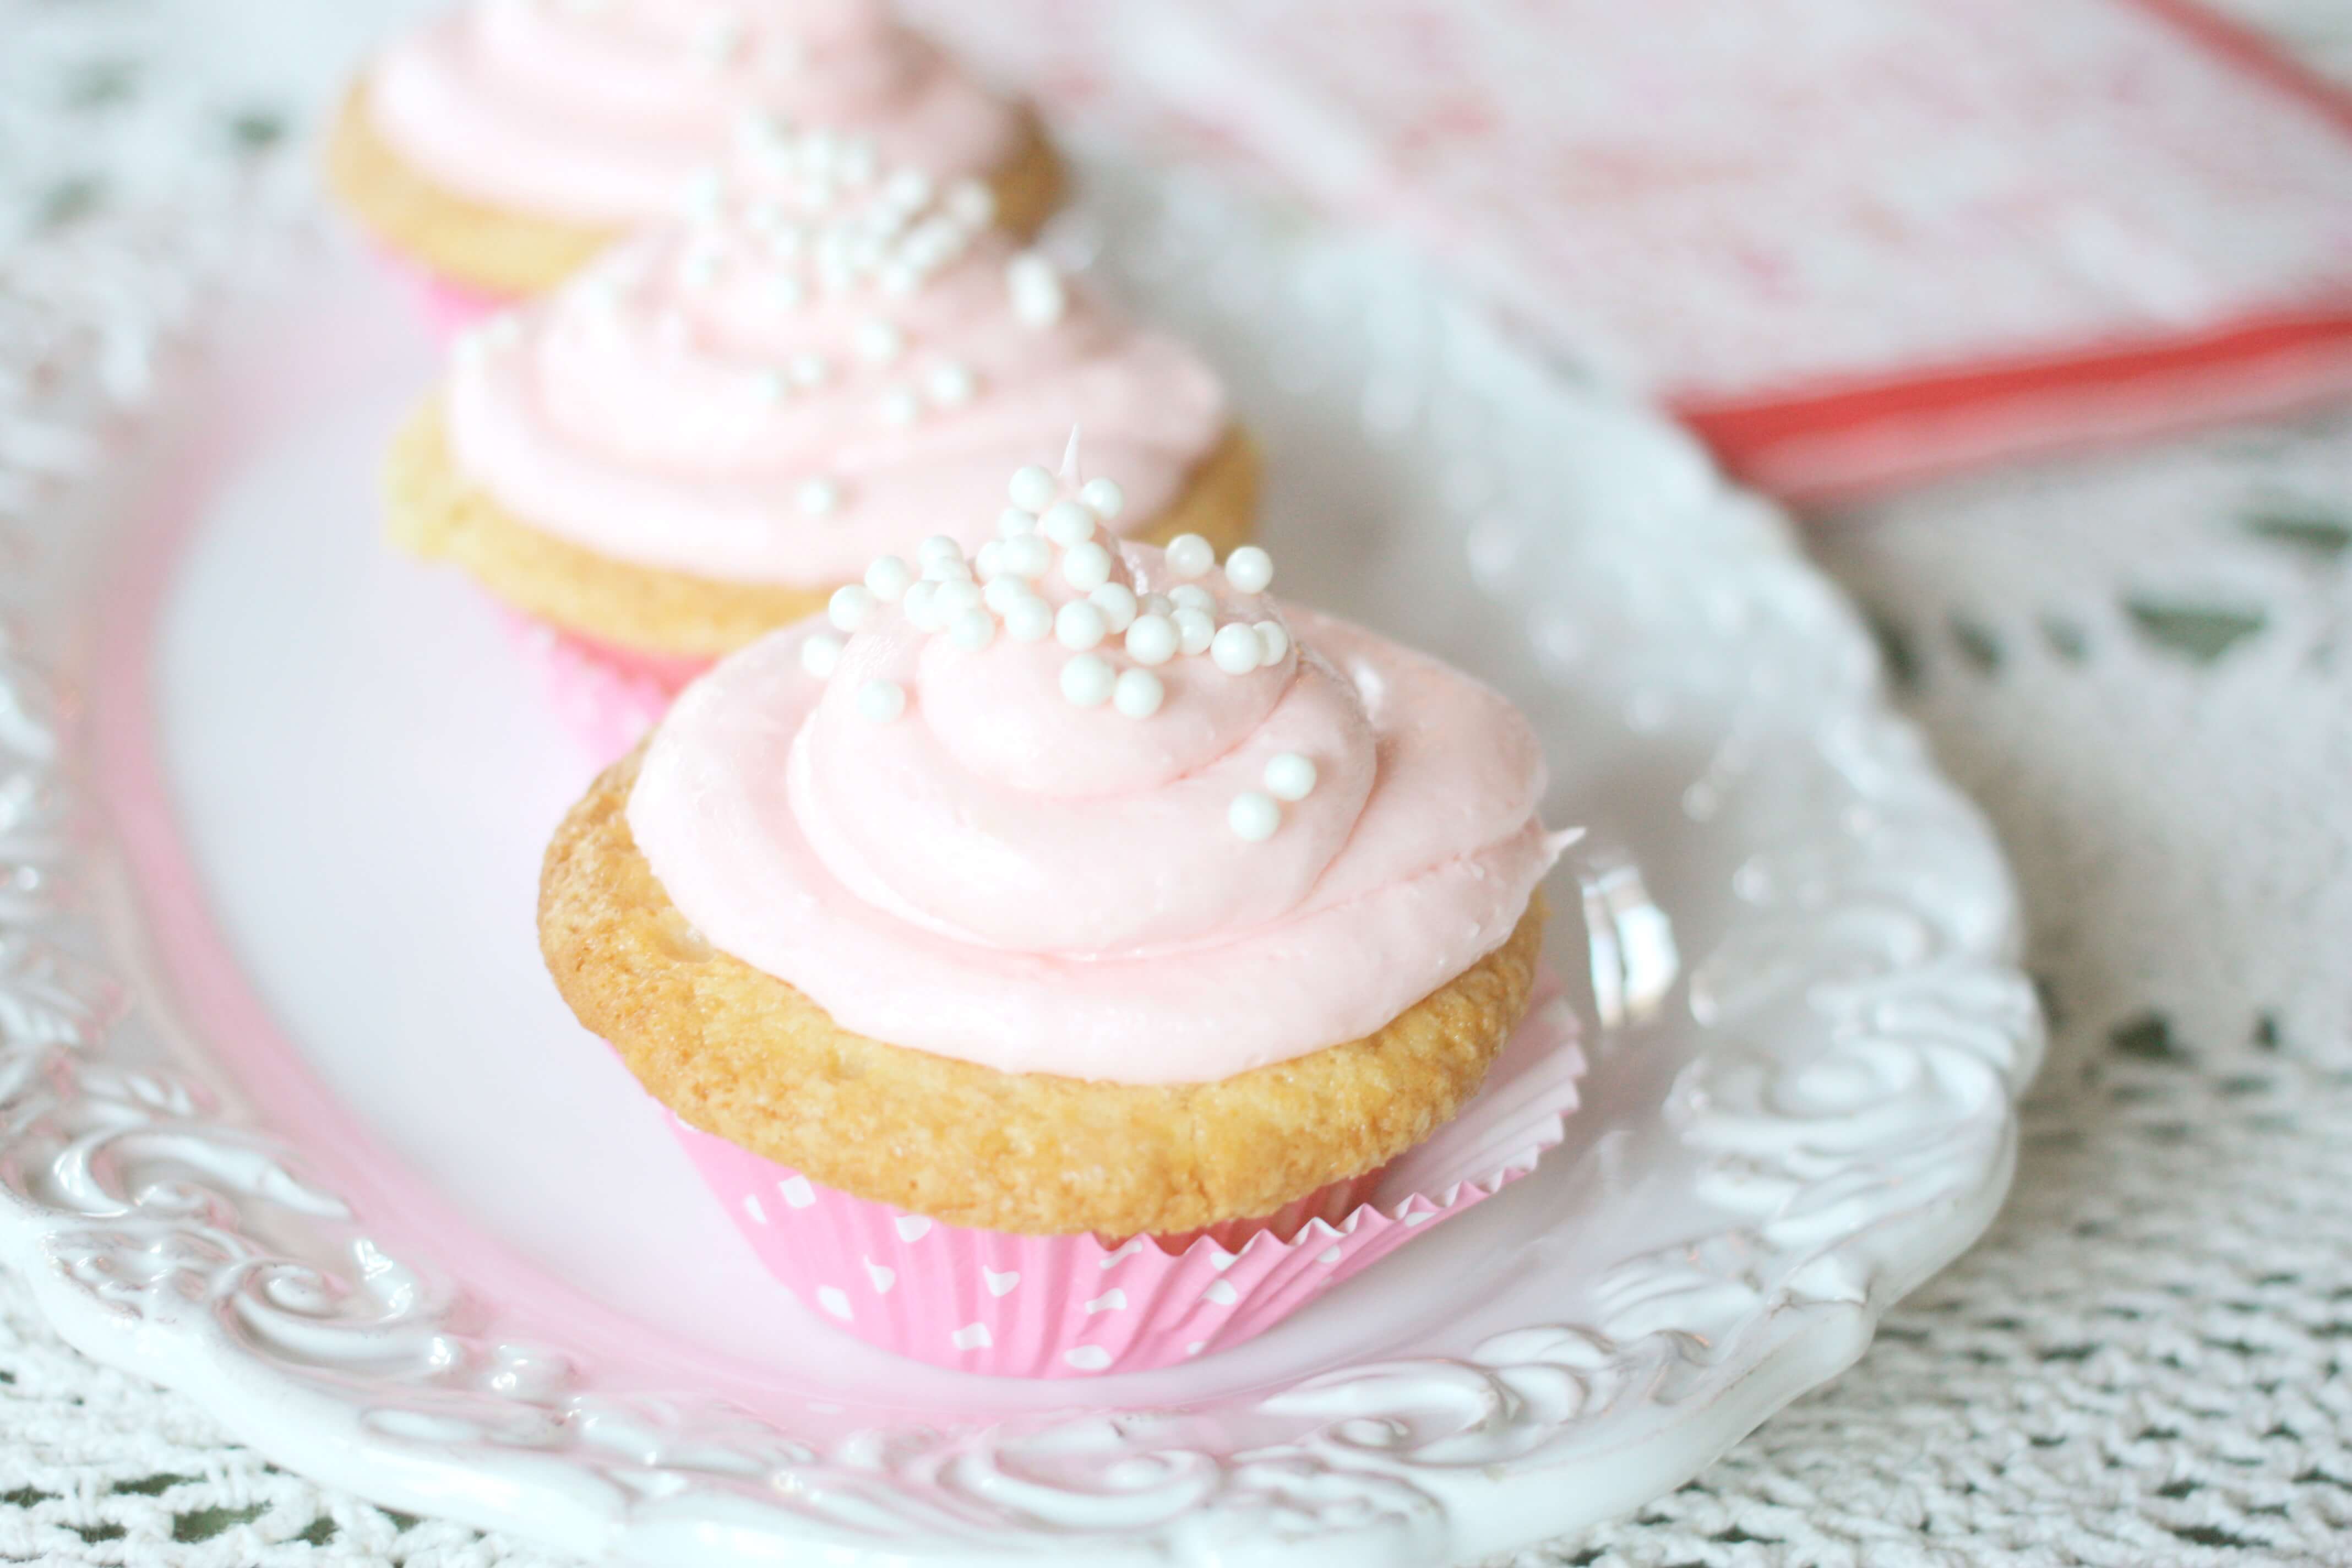 Vanilla Cupcakes with Cream Cheese Frosting